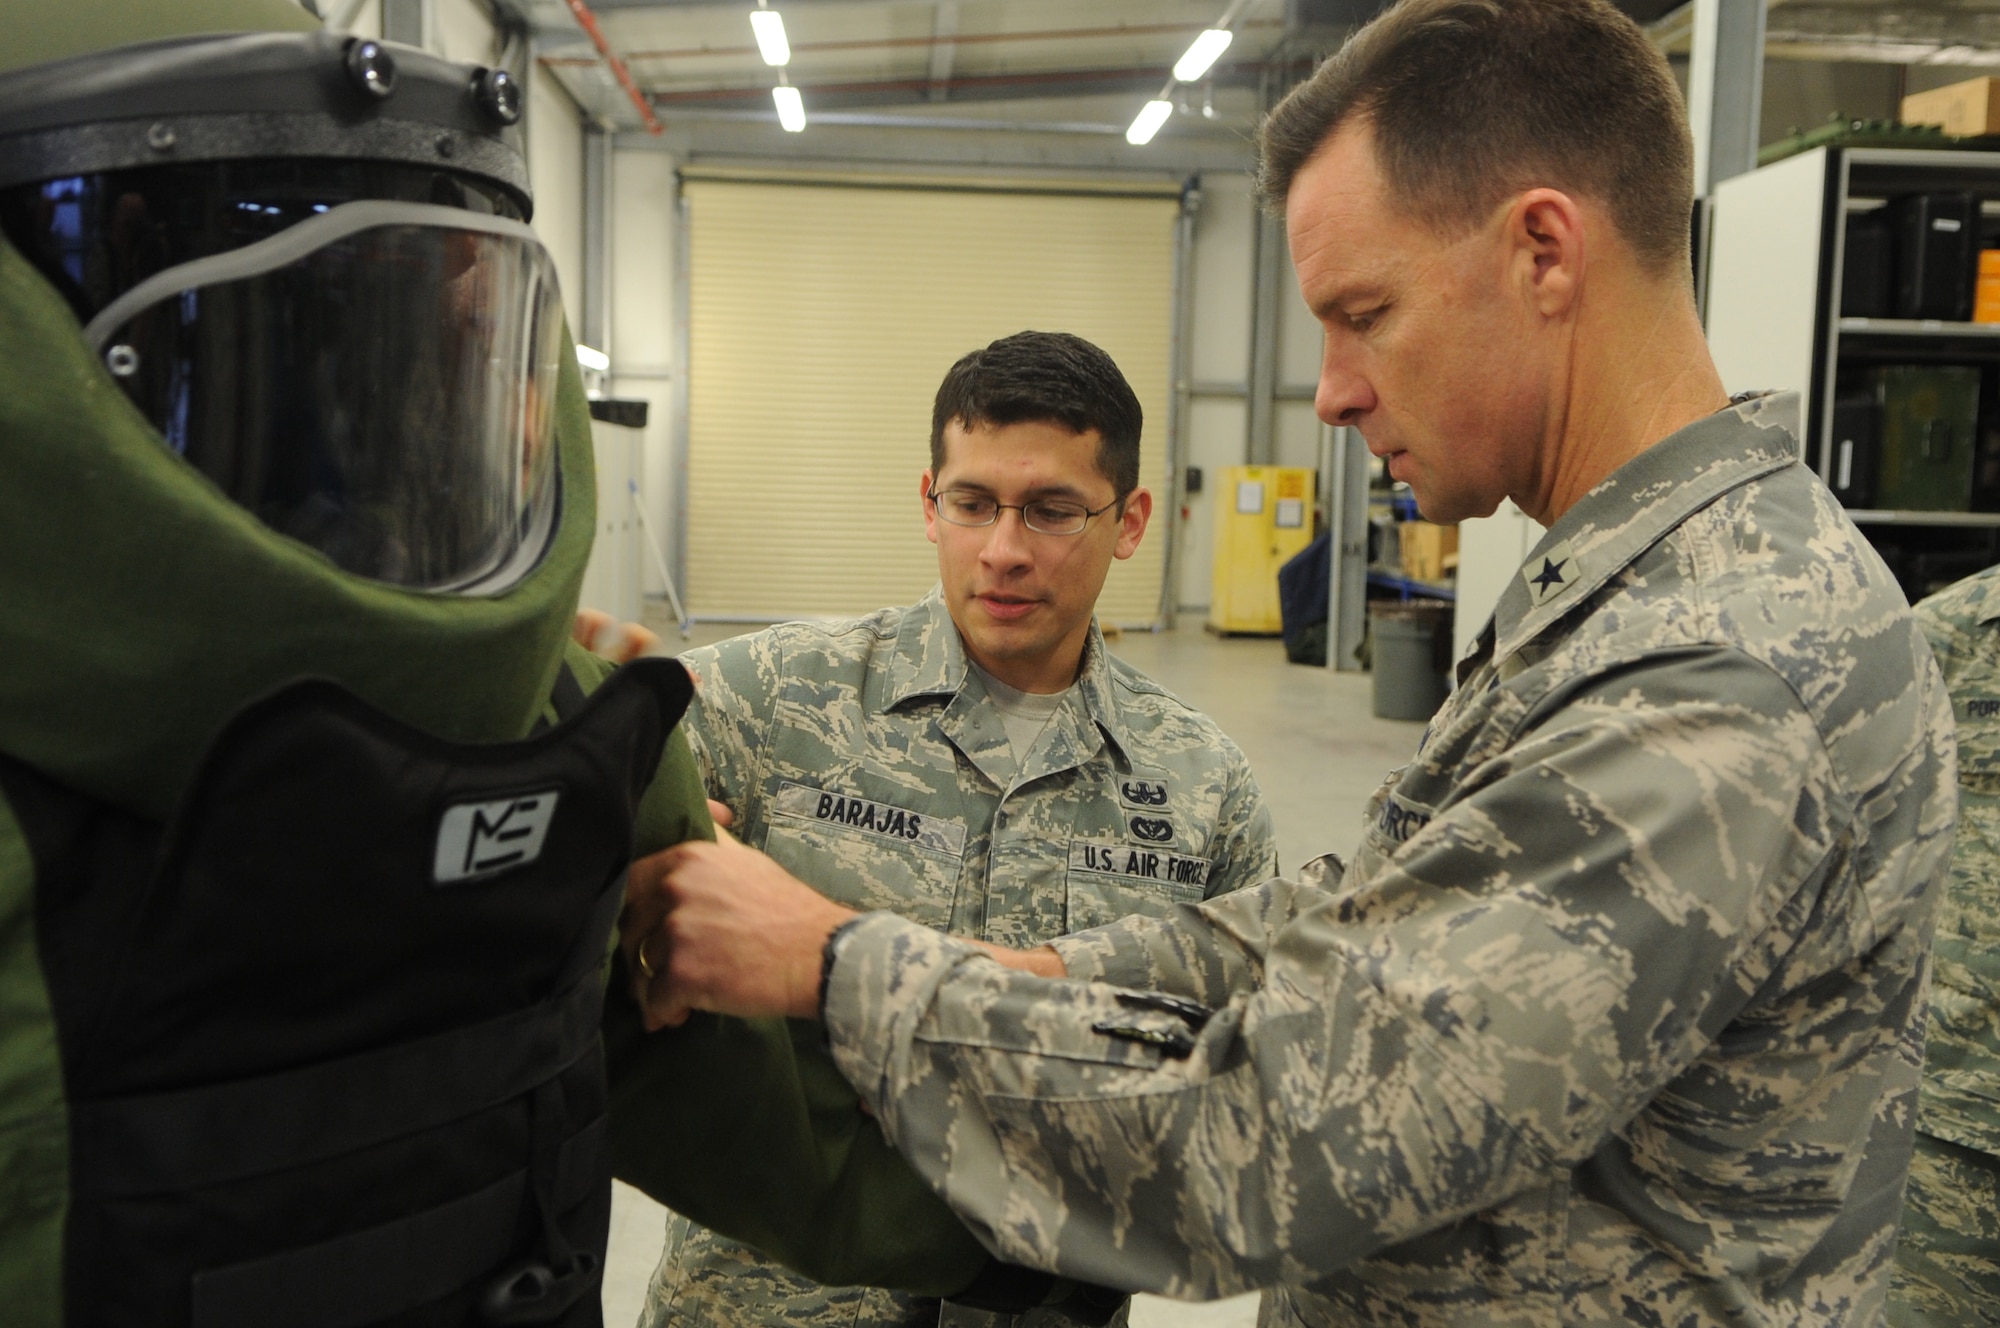 Airman 1st Class Michael Poffenberger poses in an EOD-9 bombsuit while Brig. Gen. Mark C. Dillon, 86th Airlift Wing commander, receives a brief overview on the suit's construction and functionality from A1C Christopher Barajas, 886 Civil Engineer Squadron while visiting the Explosive Ordinance Disposal facility on Ramstein Air Base Germany on December 12, 2009. (U.S. Air Force photo by Tech. Sgt. Sean M. White)